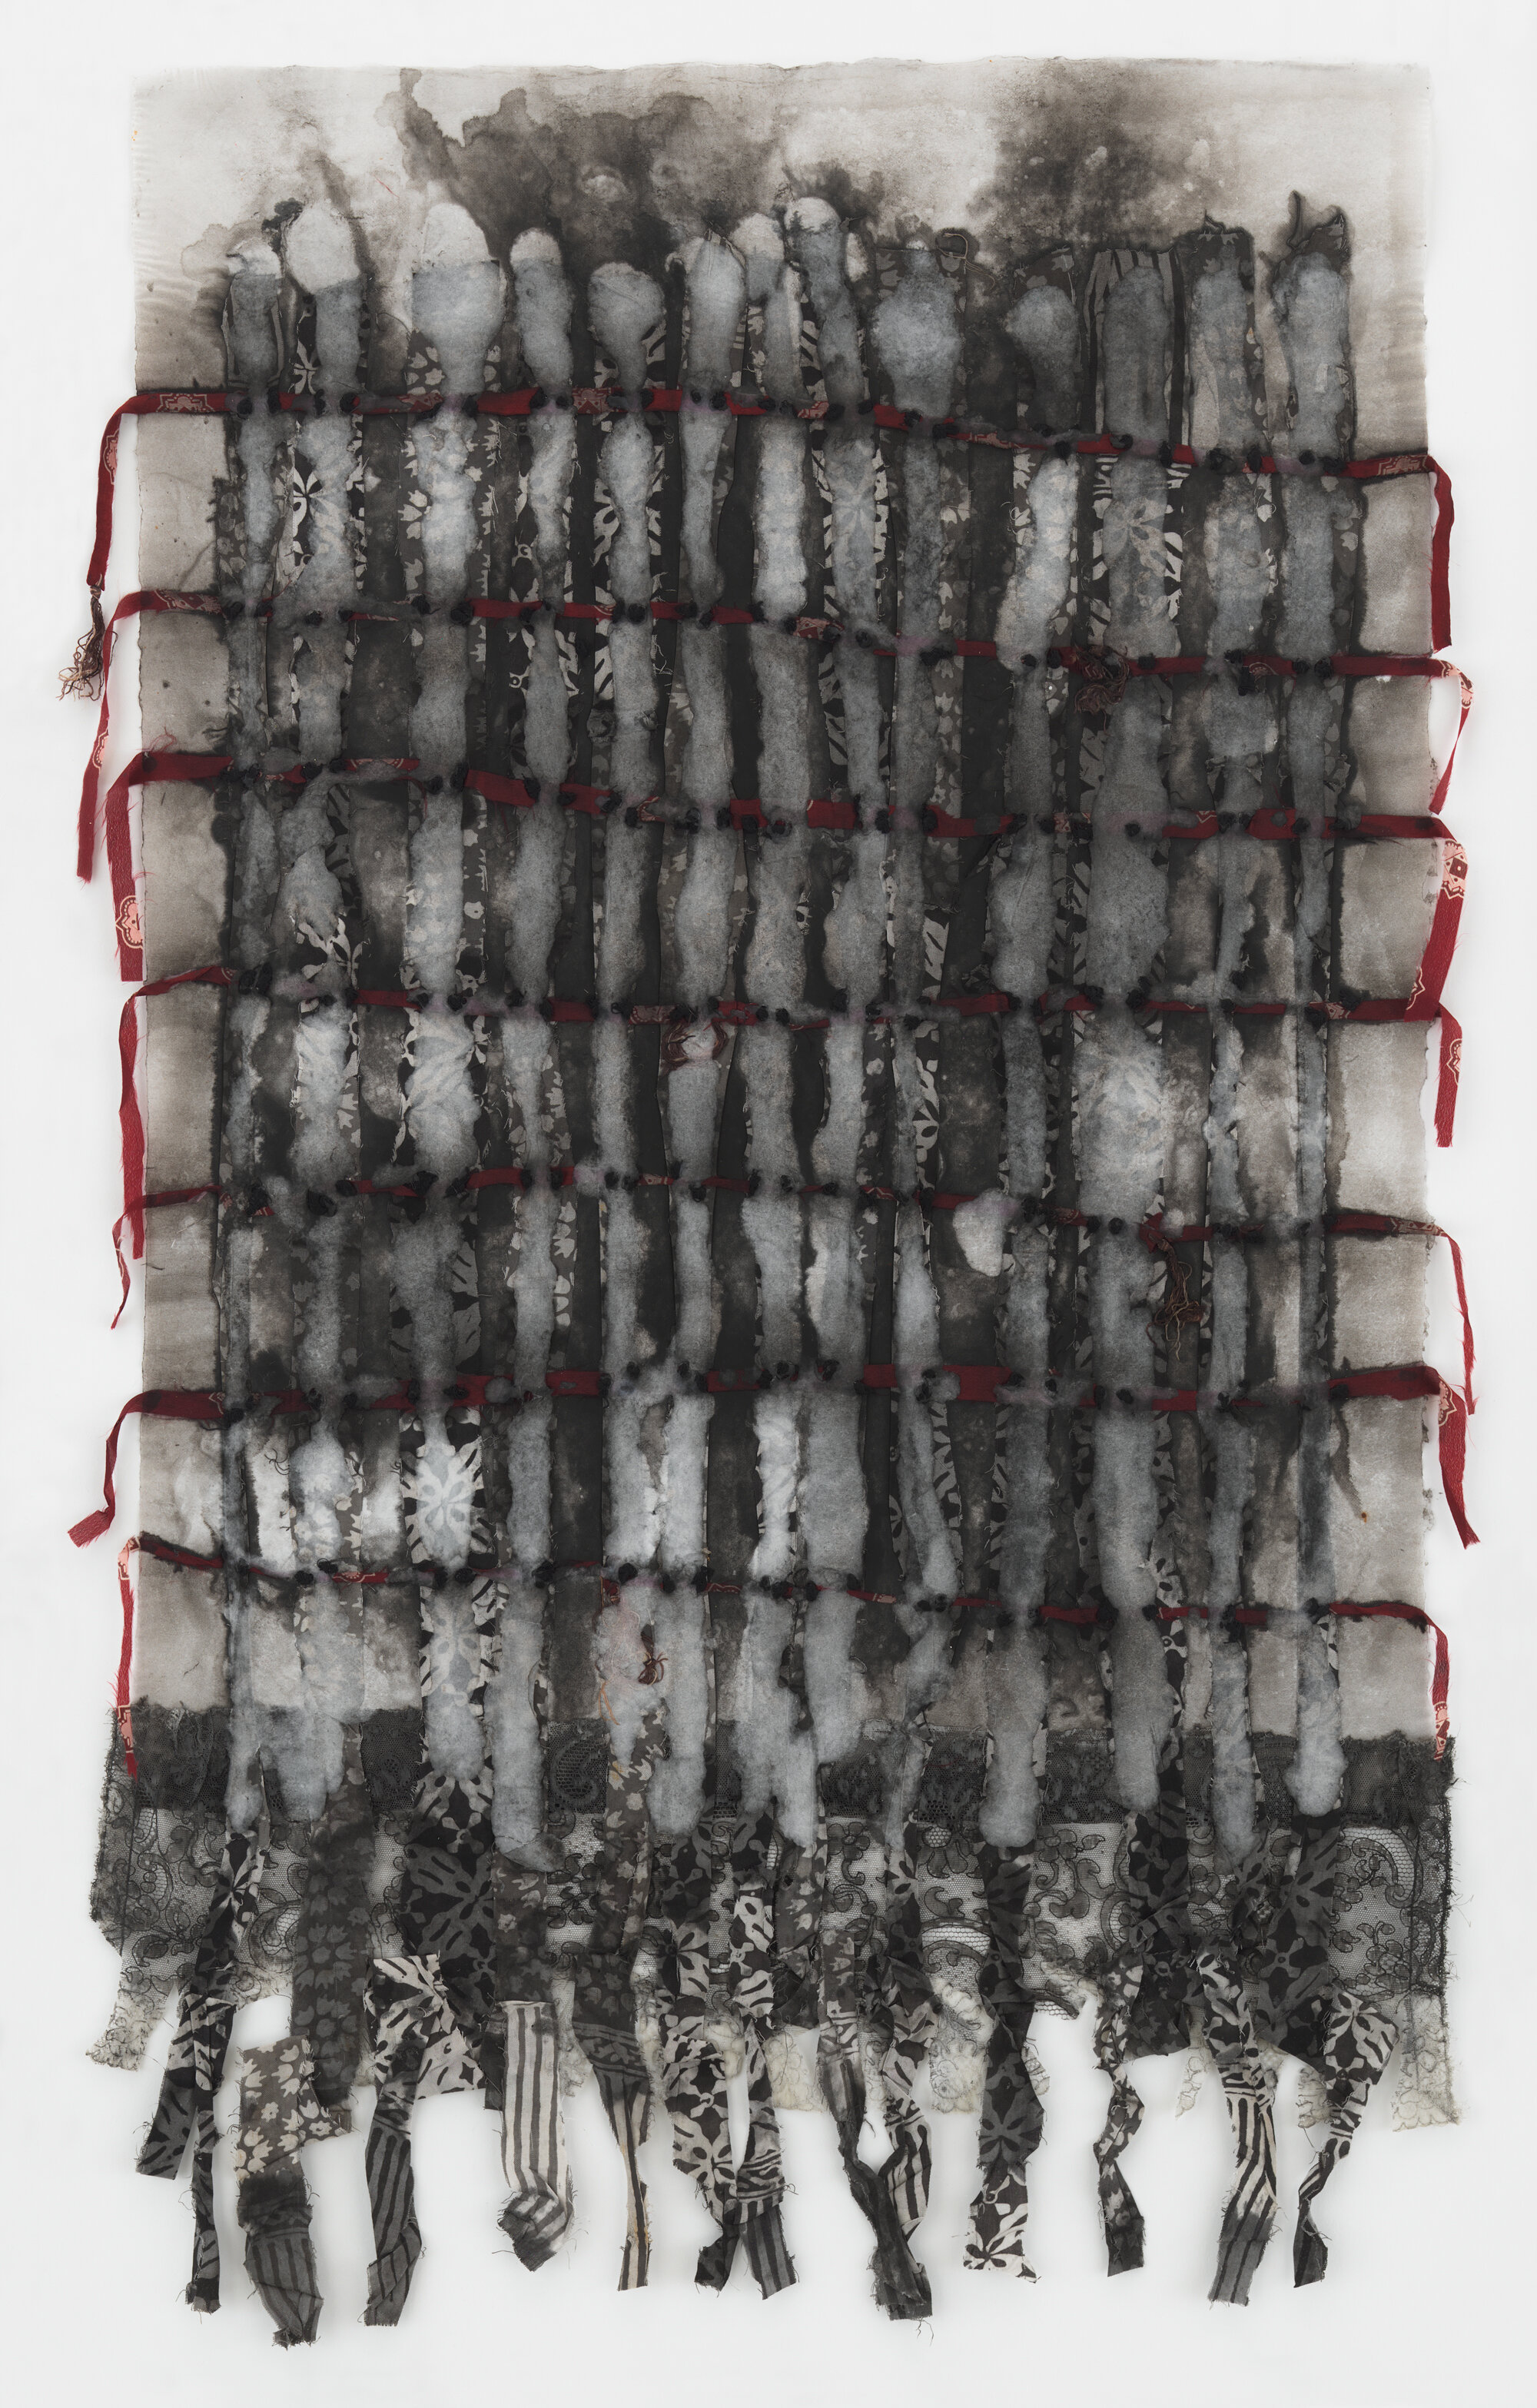   Untitled , 2016 Pulp, pigment, thread, fabric, and linen handmade paper 42 x 23.5 in. 